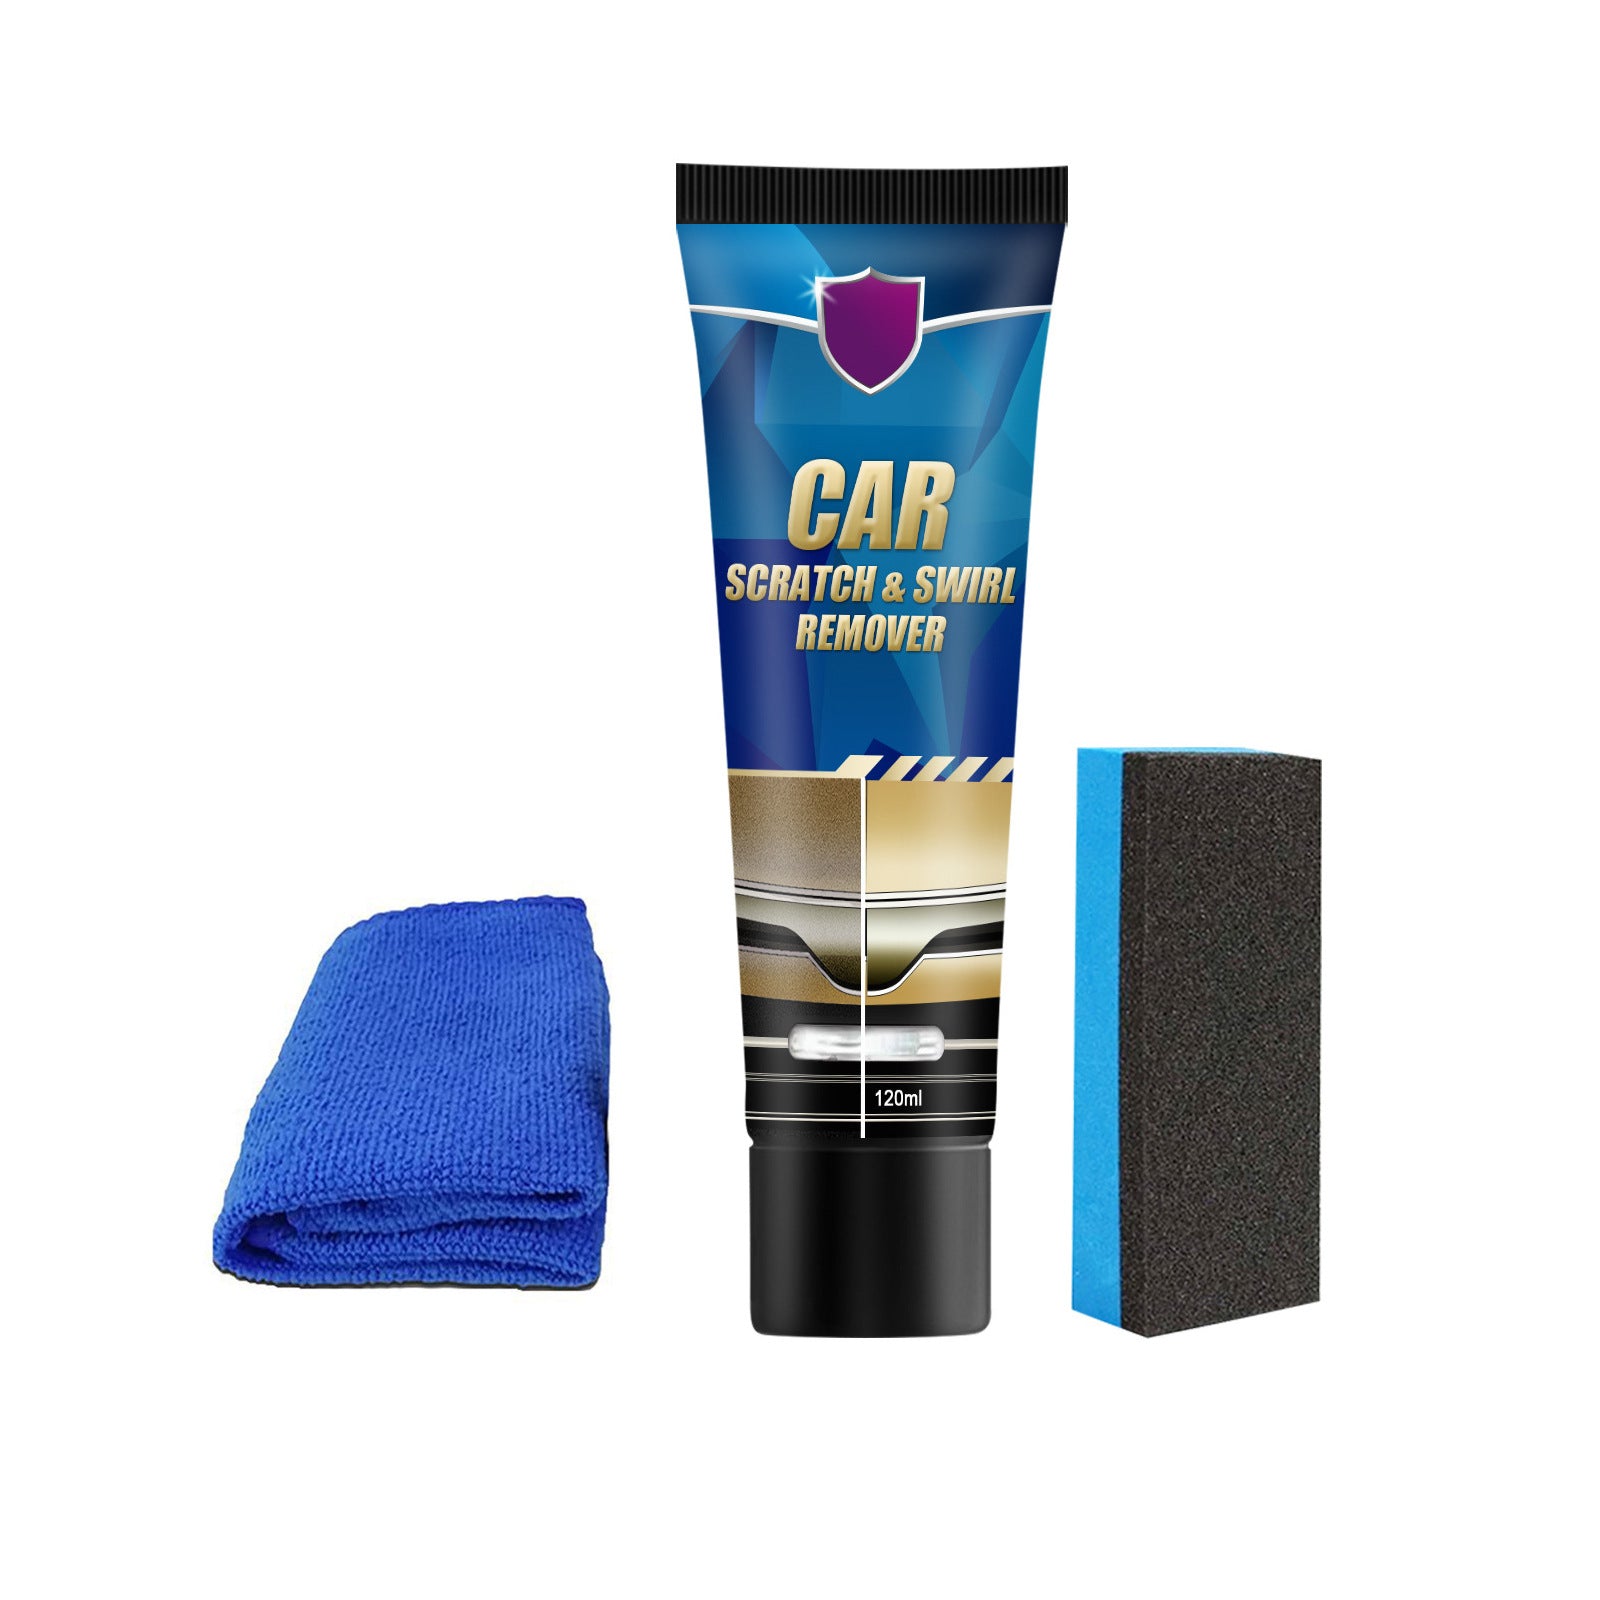 North Moon Premium Car Scratch Remover Kit - Perfect Solution for Your Vehicle's Paint